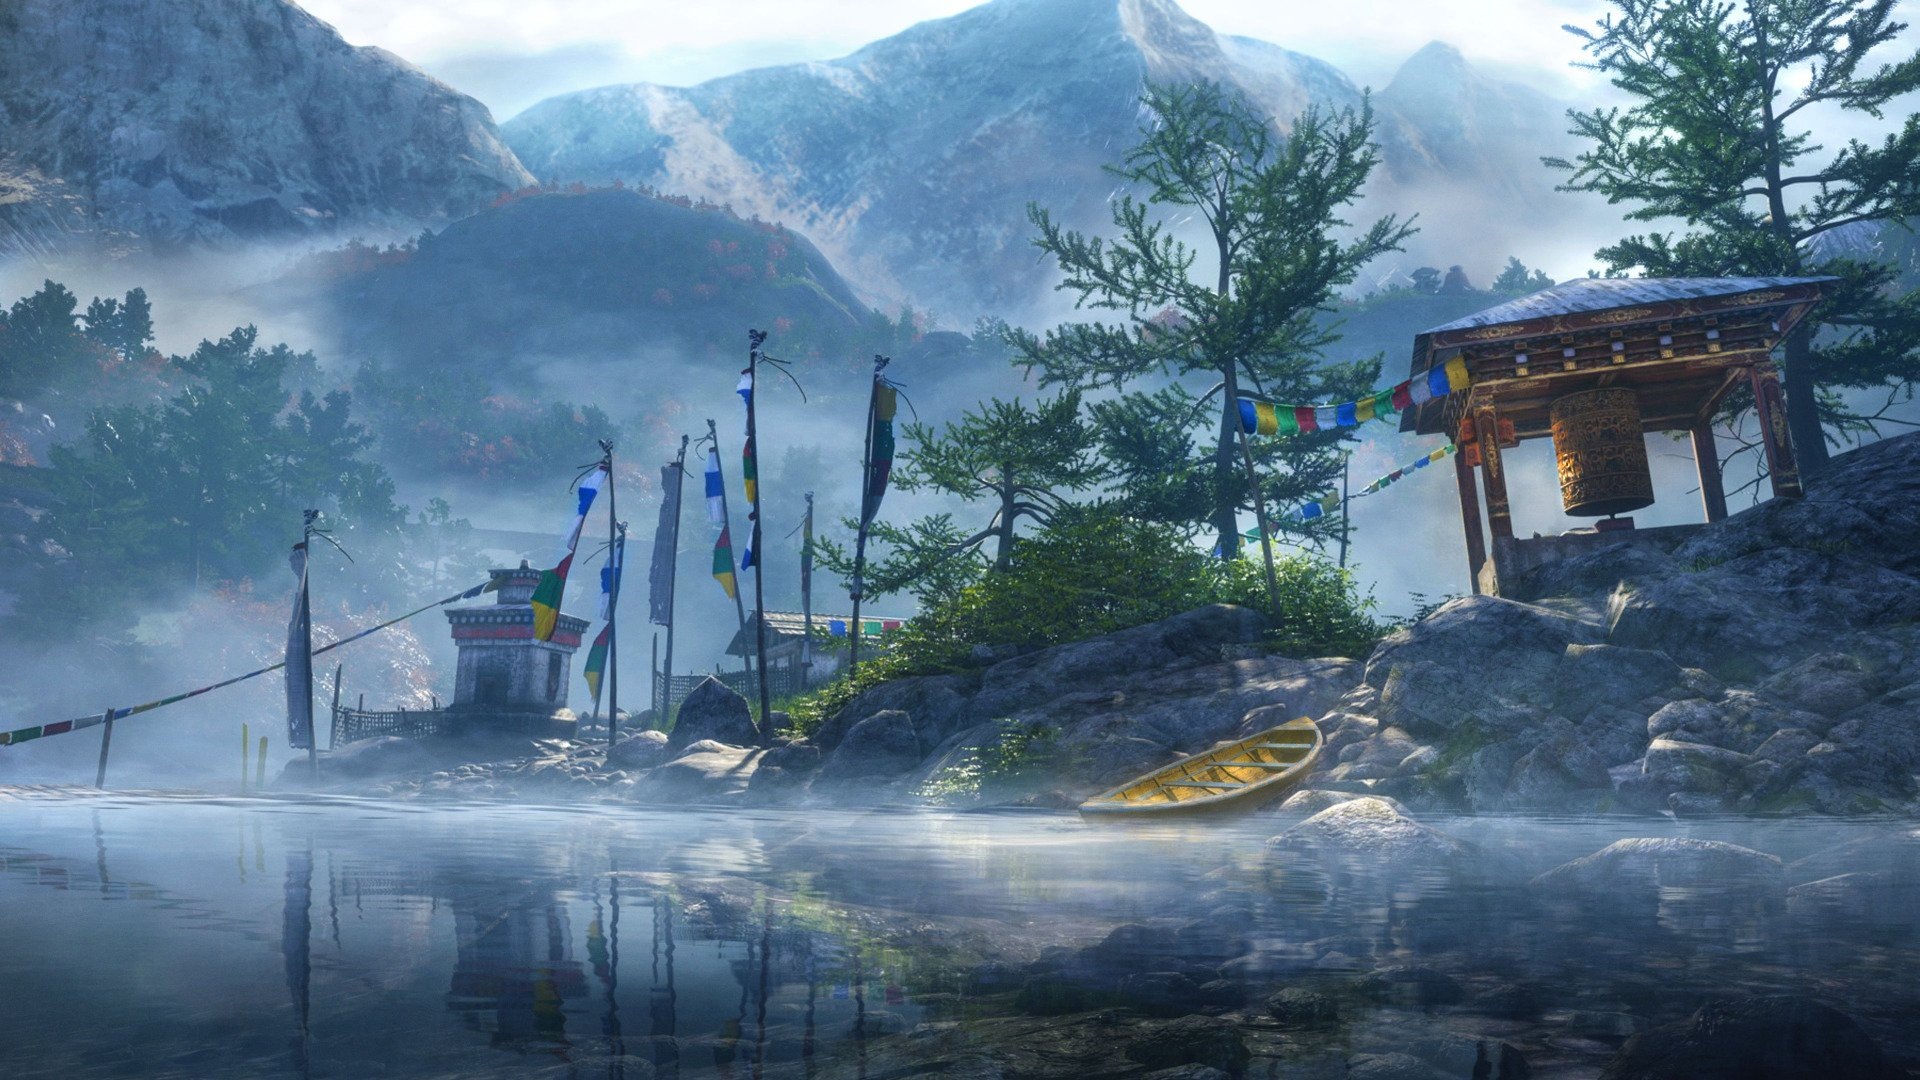 Far Cry 4 HD game wallpapers #11 - 1920x1080